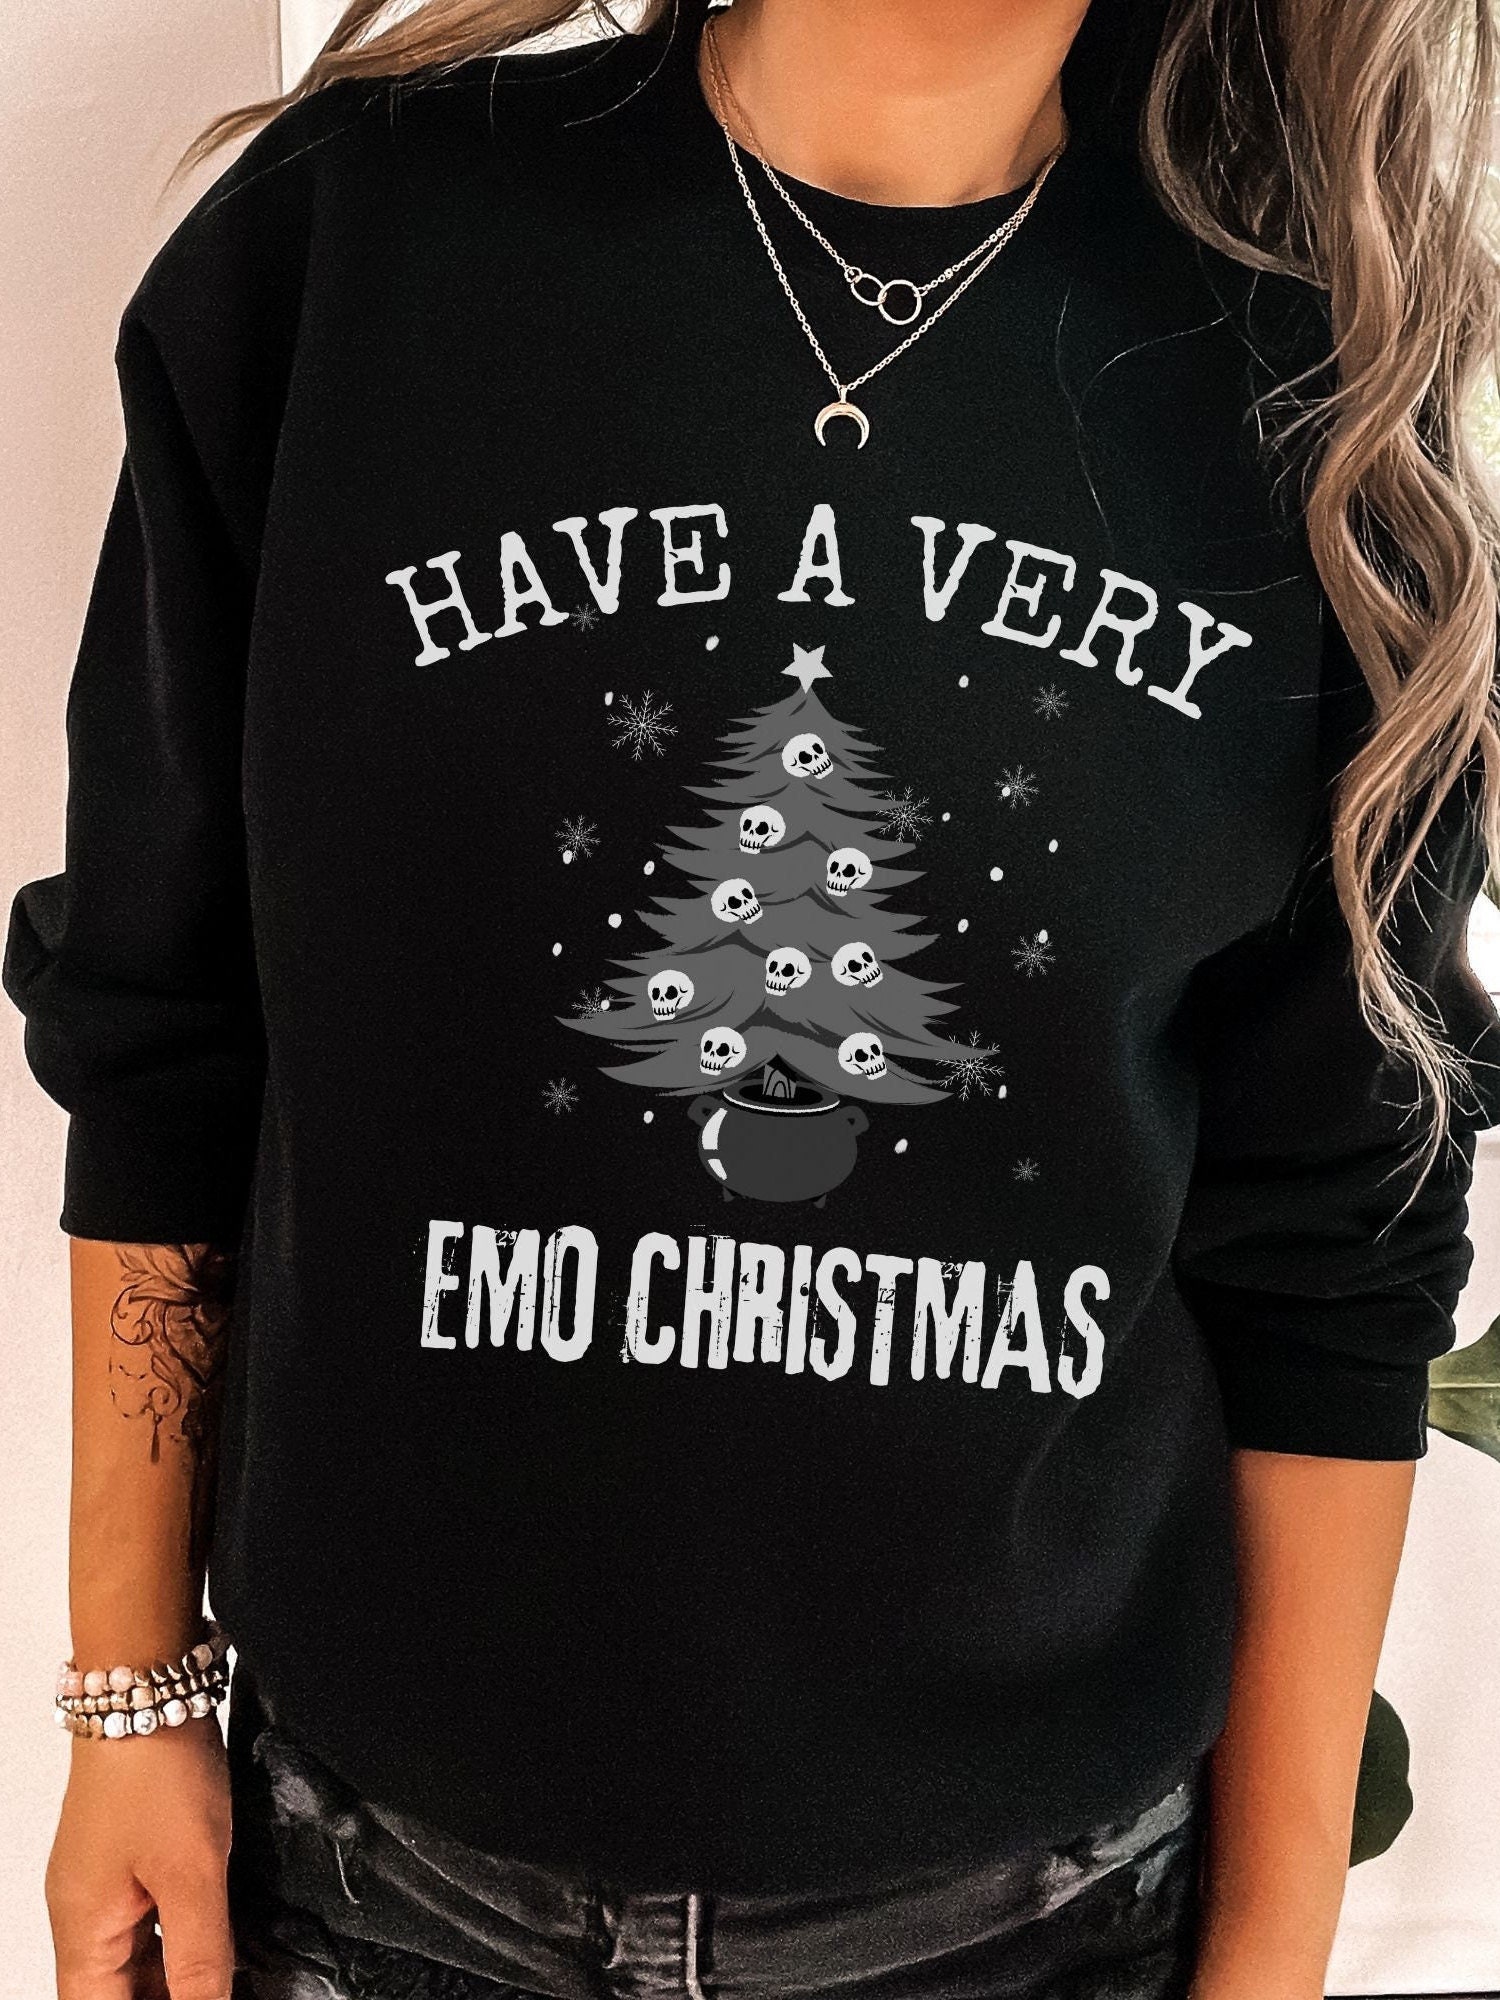 Gift Ideas For Emo Kids - Last Minute Christmas Gift Guide